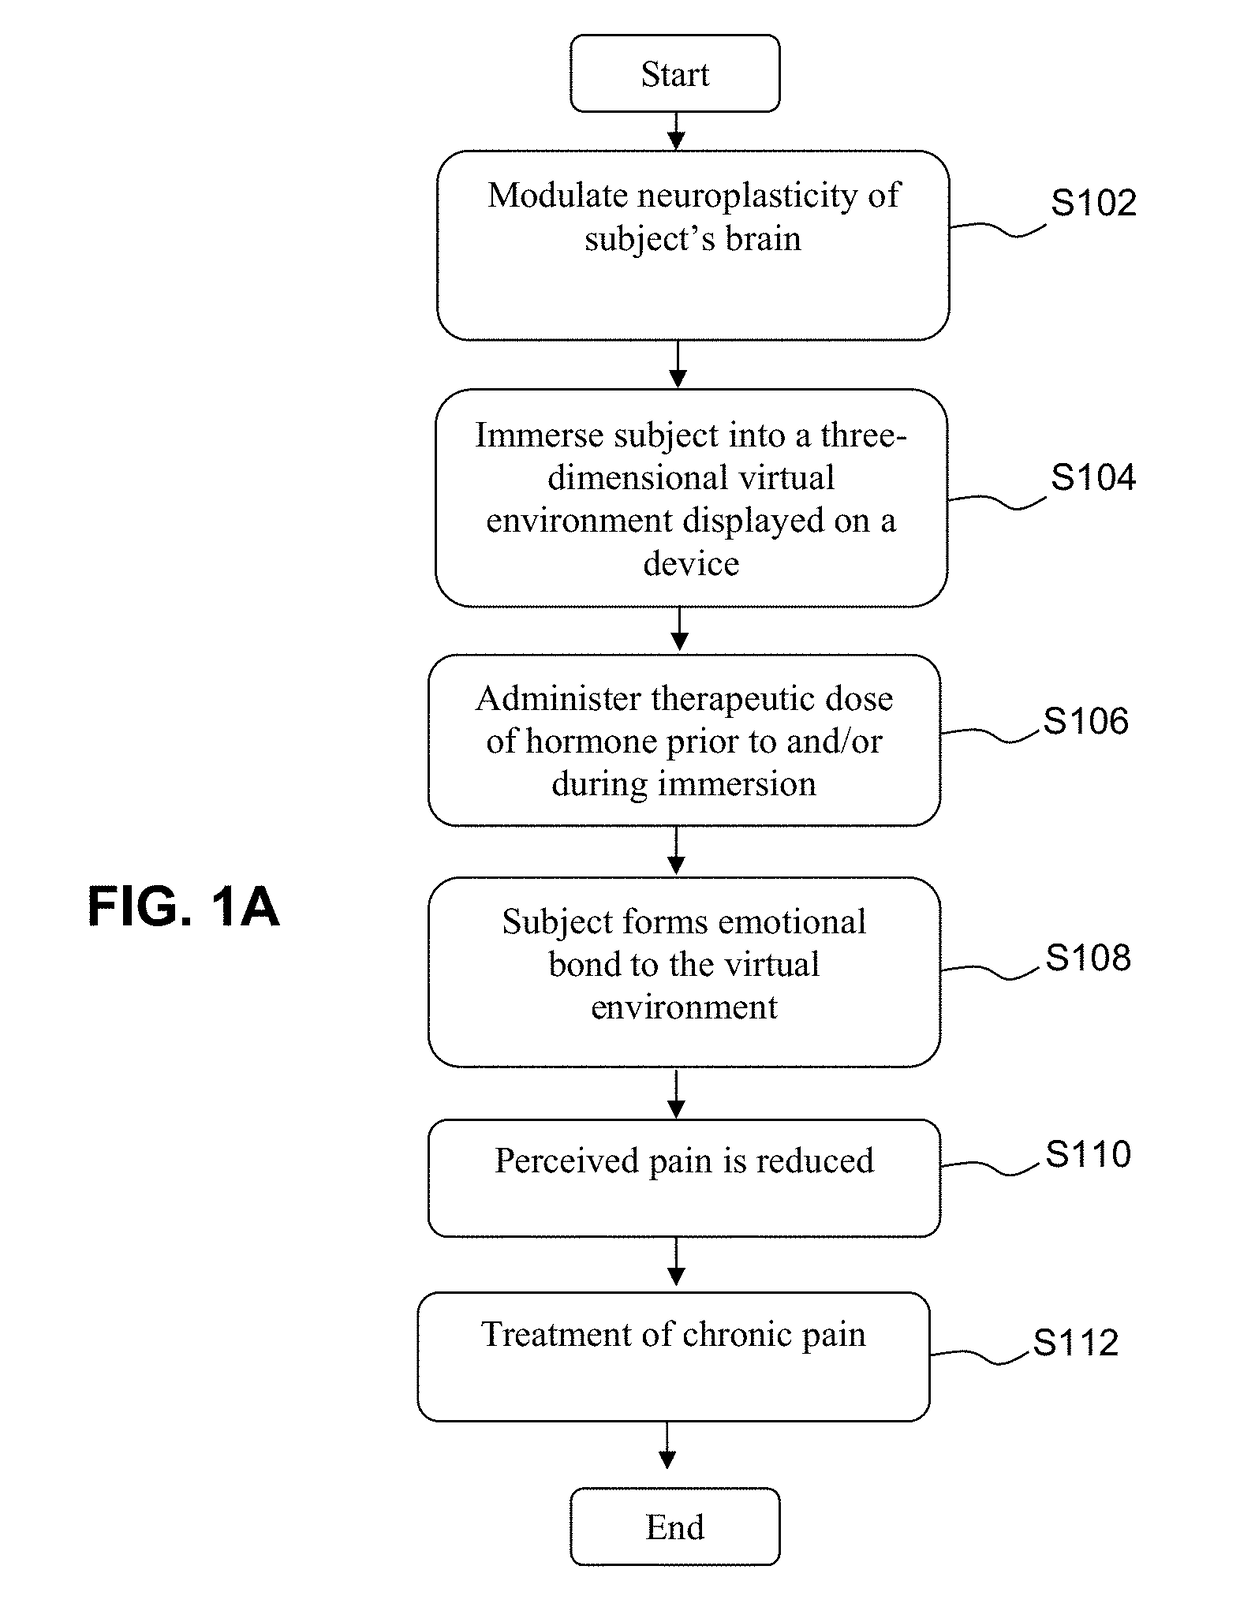 Systems and methods for treating chronic pain